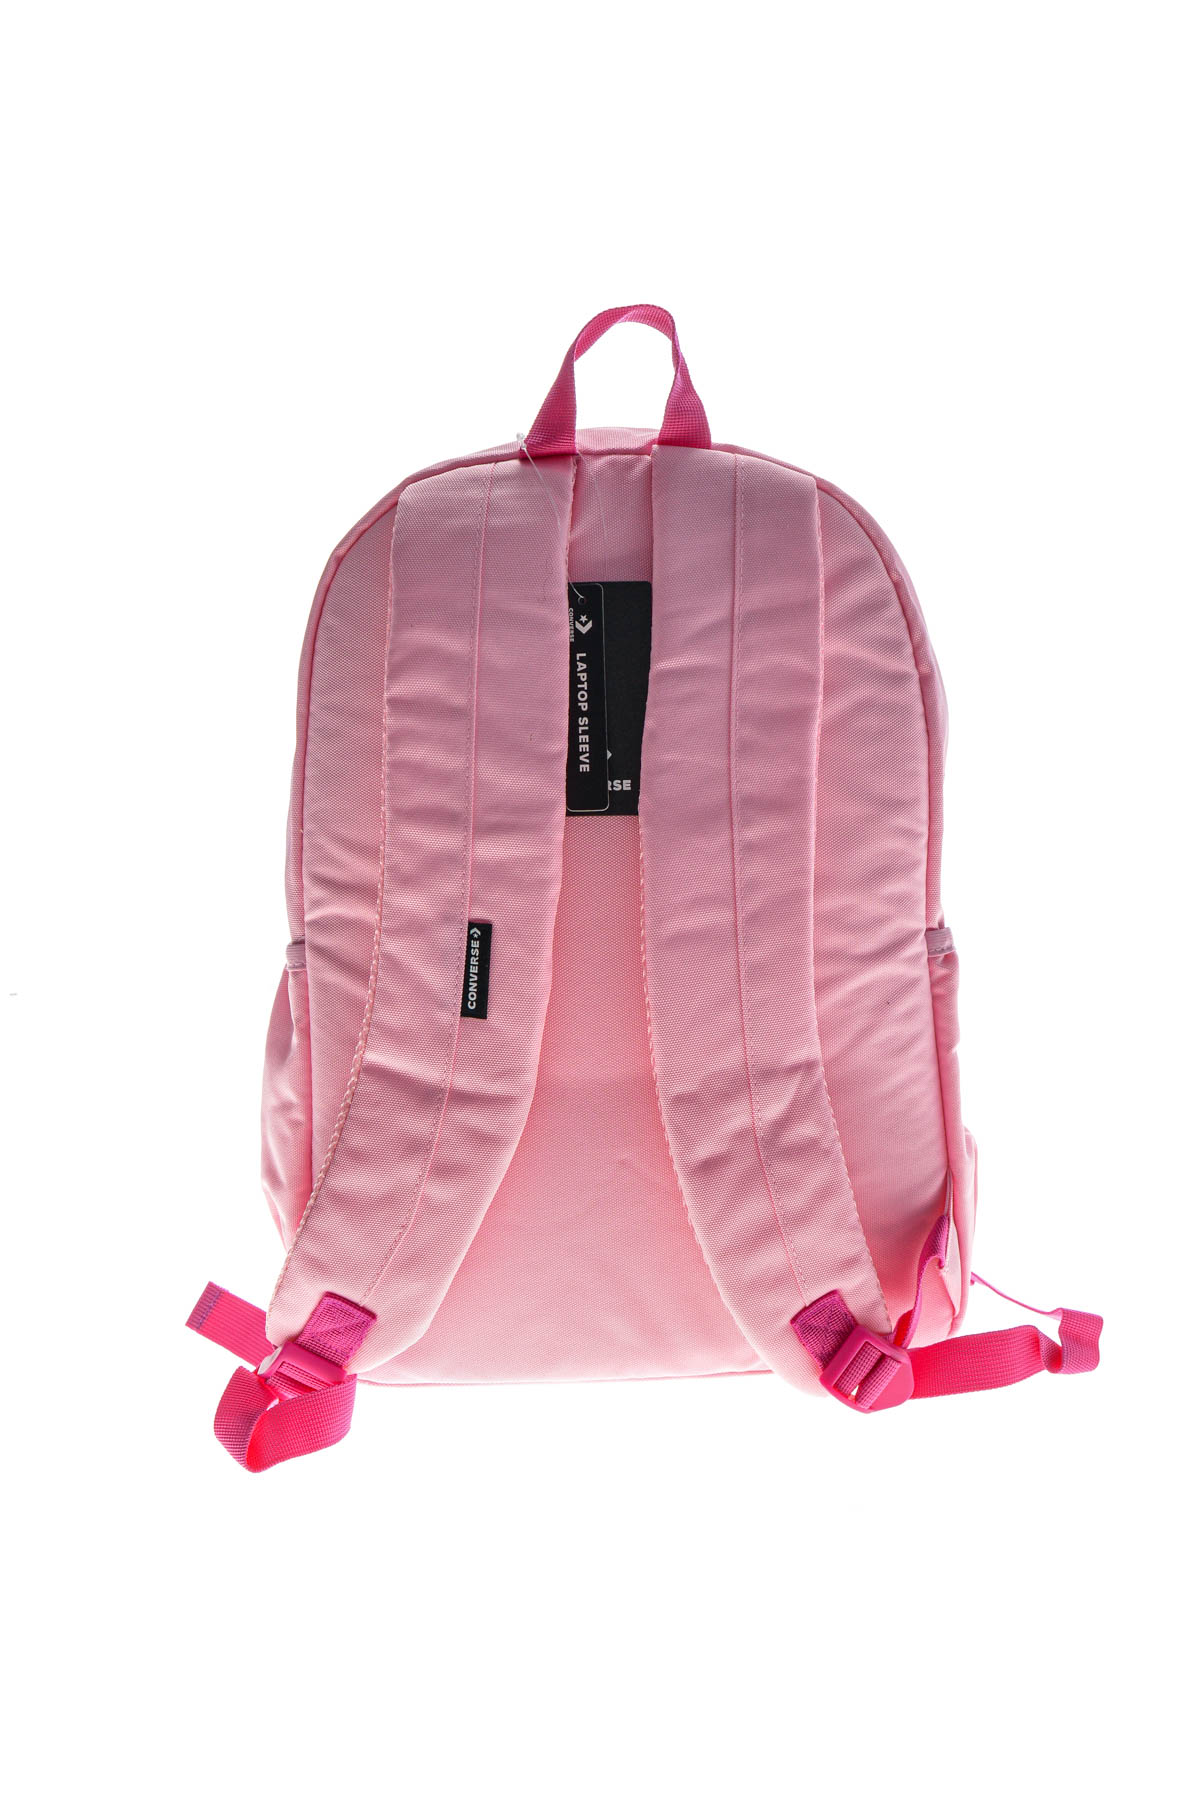 Backpack - Convers - 1